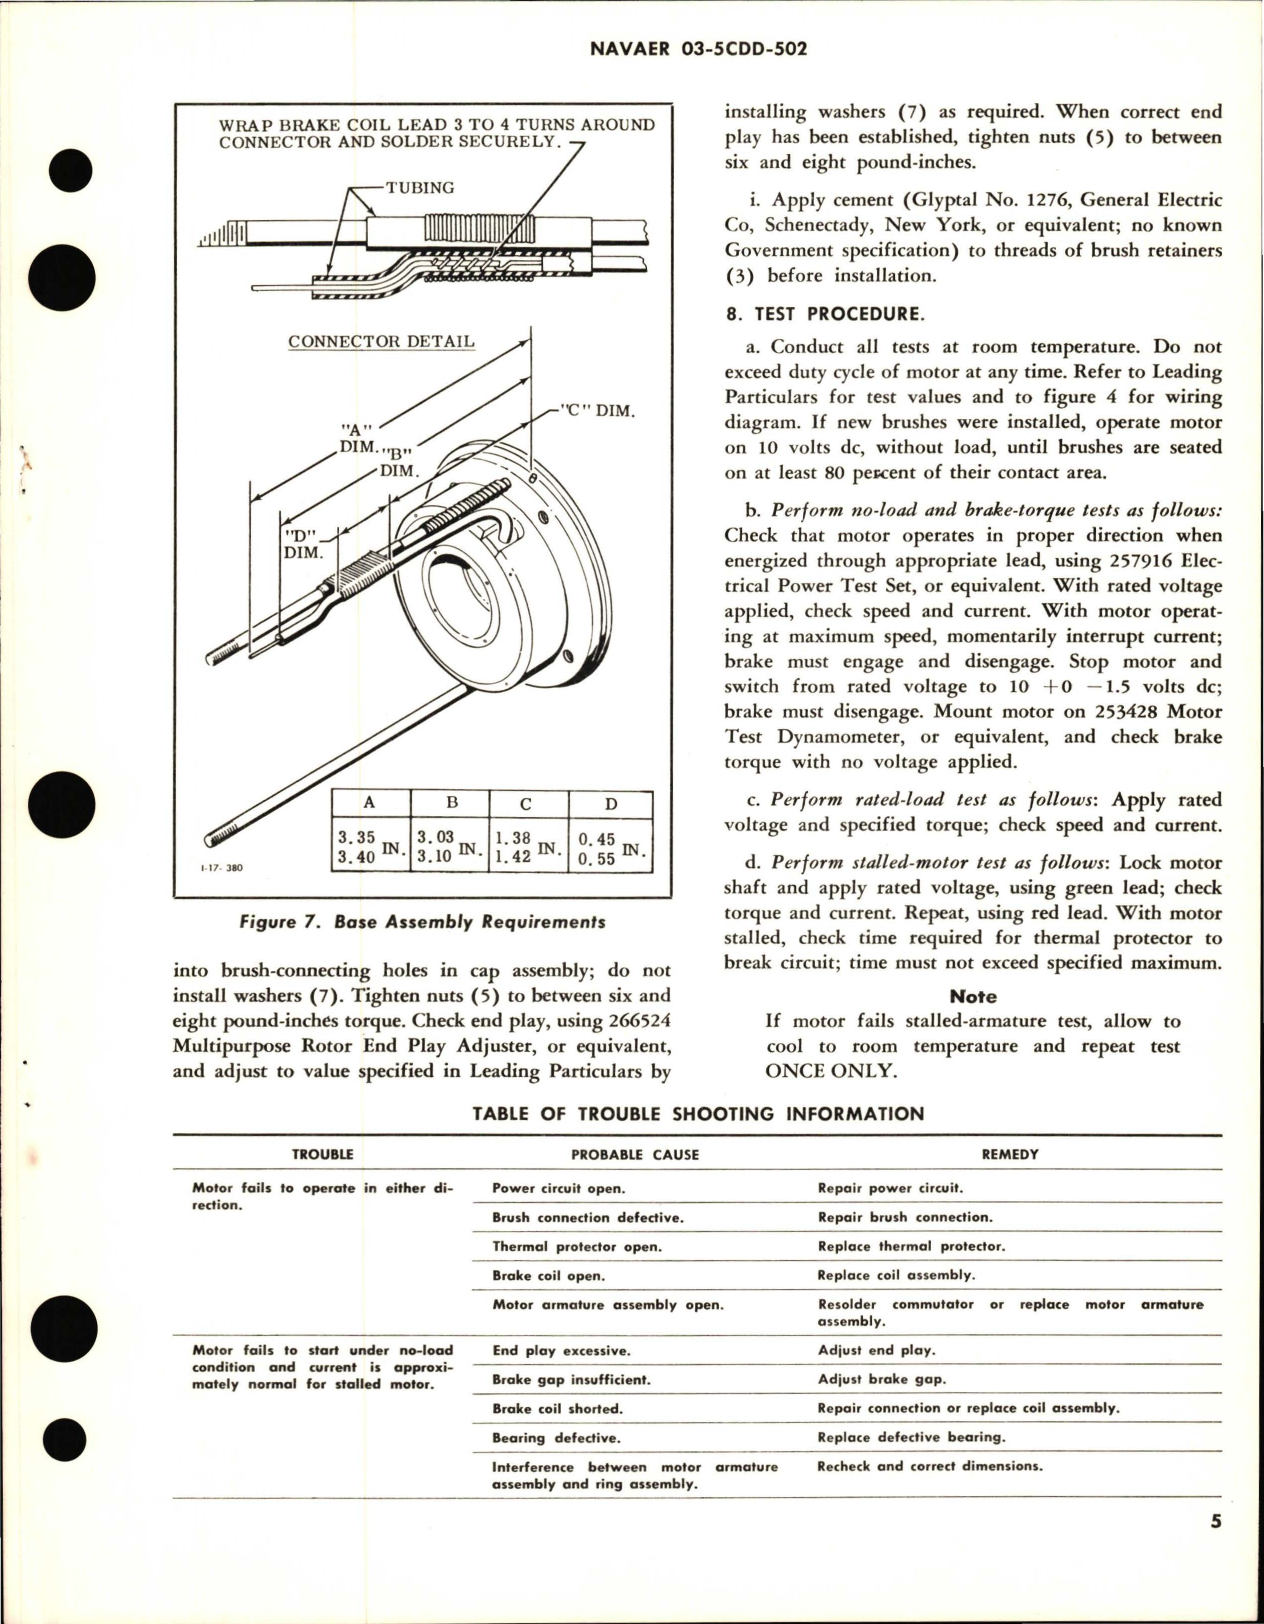 Sample page 5 from AirCorps Library document: Overhaul Instructions with Parts Breakdown for Motor, 0.07 HP Aircraft Direct Current - Part 32355-6